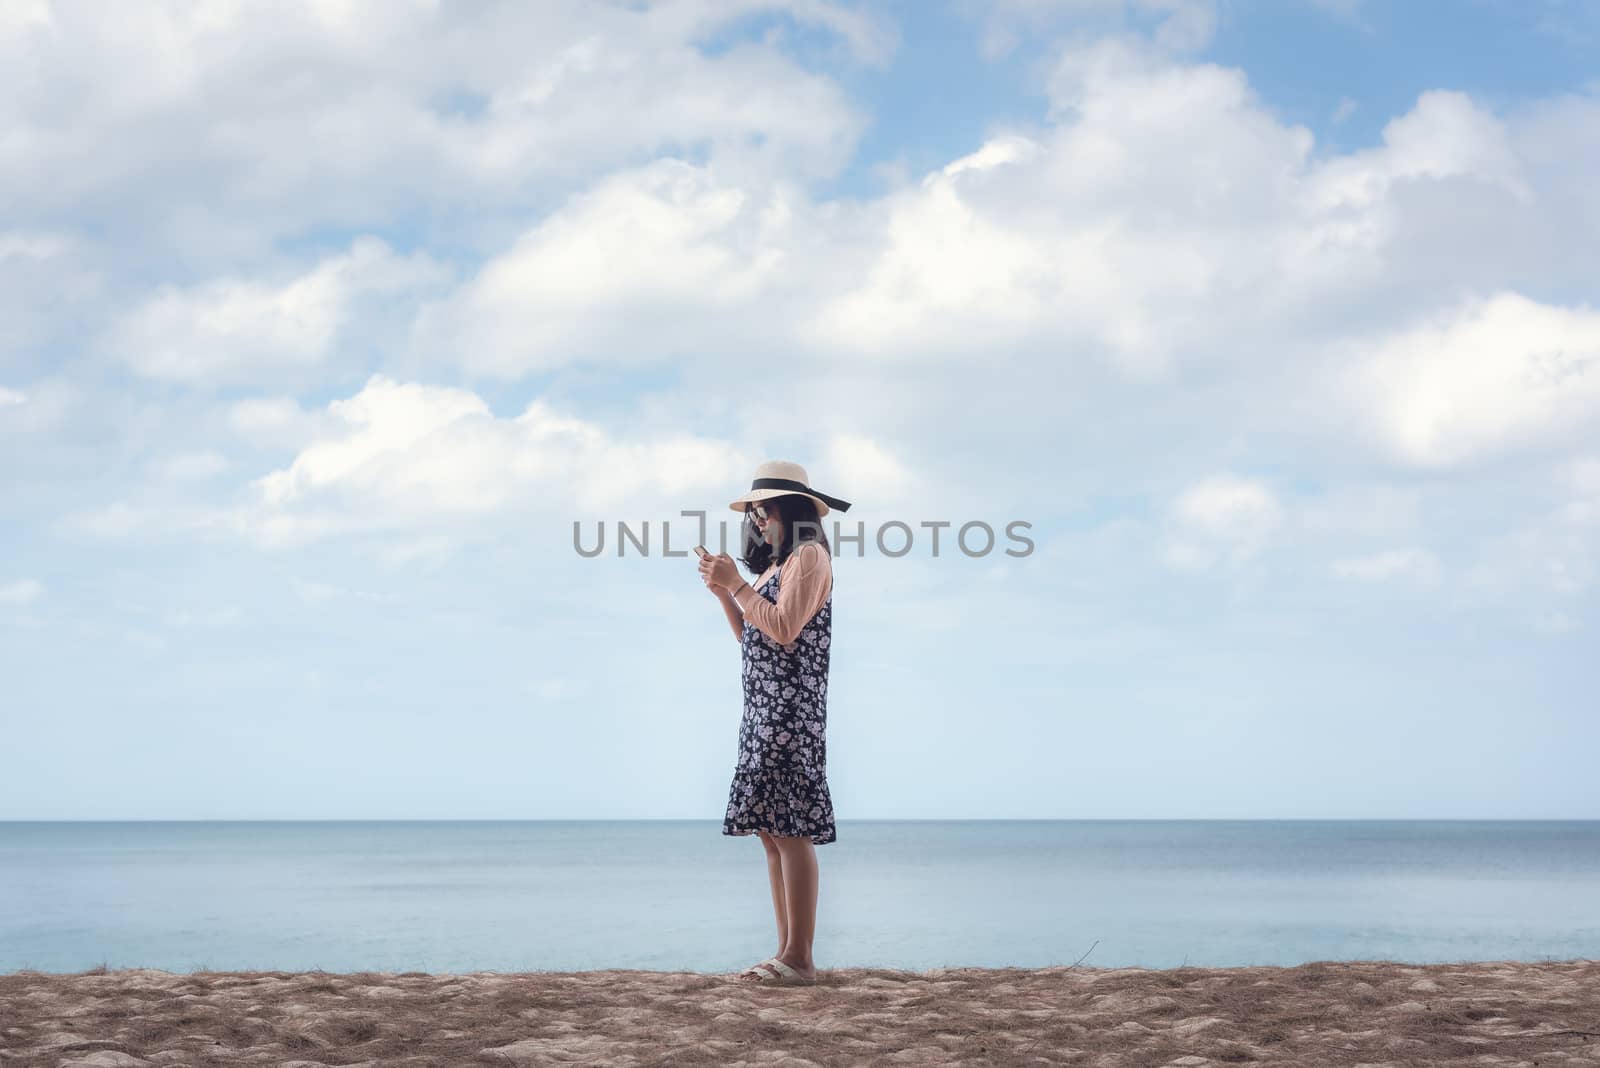 Portrait of Asian Woman is Using Mobile Phone Against Blue Sky and Sand Beach, Beautiful Woman is Having Fun and Enjoying With Her Phone While Summer Vacation on The Beach. Relaxation Lifestyles by MahaHeang245789